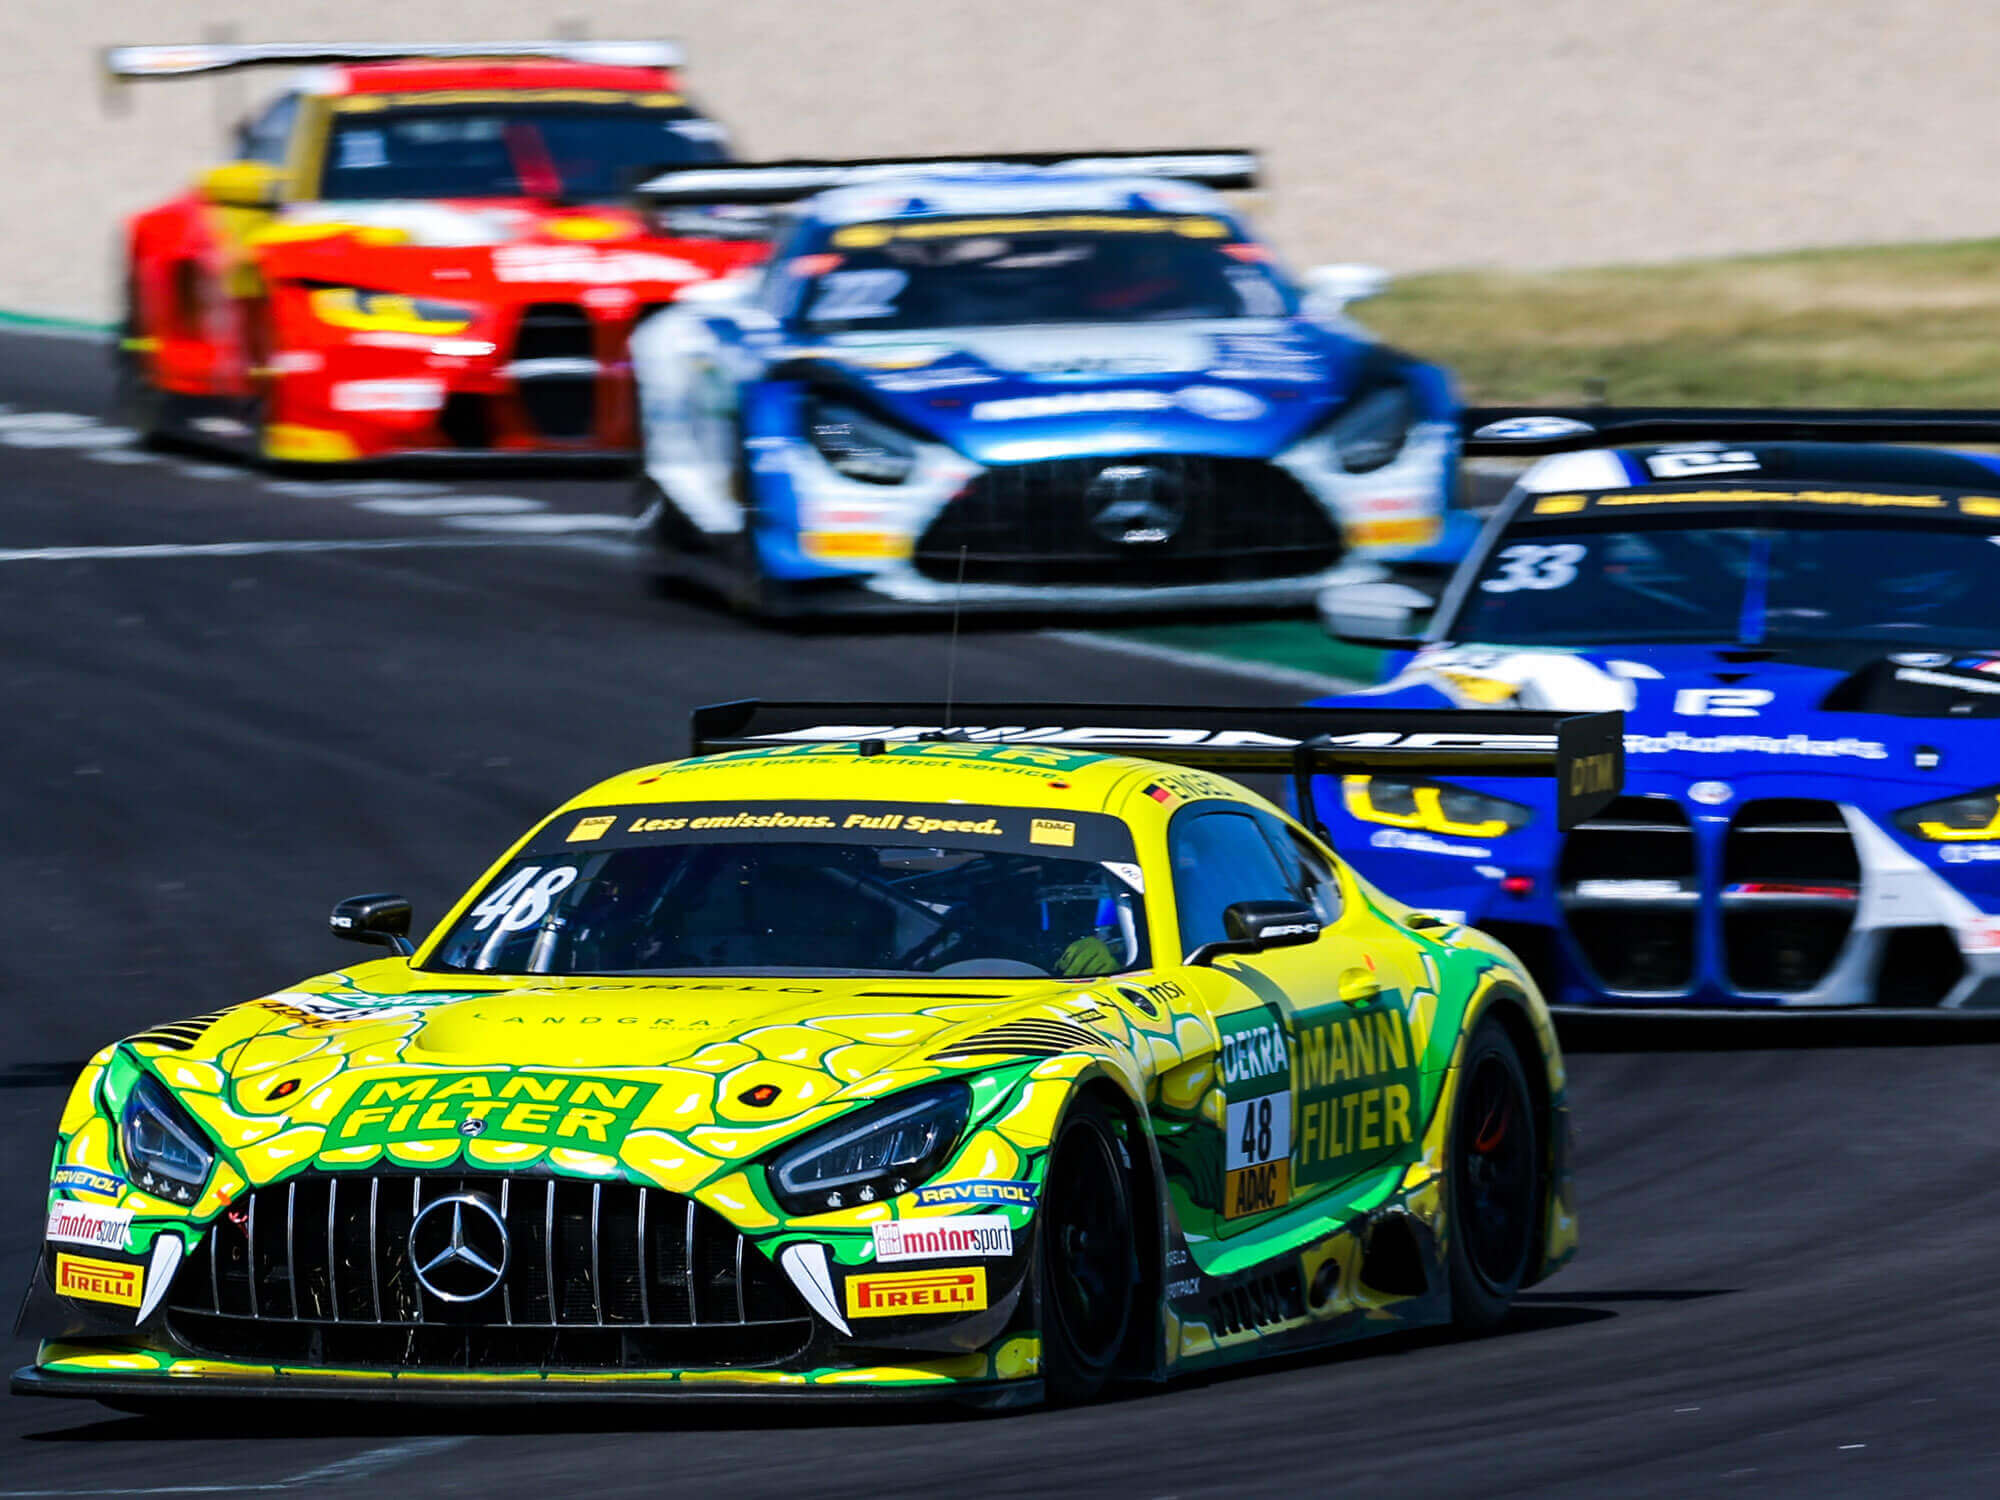 MANN-FILTER rises the challenge at the Kyalami 9 Hour